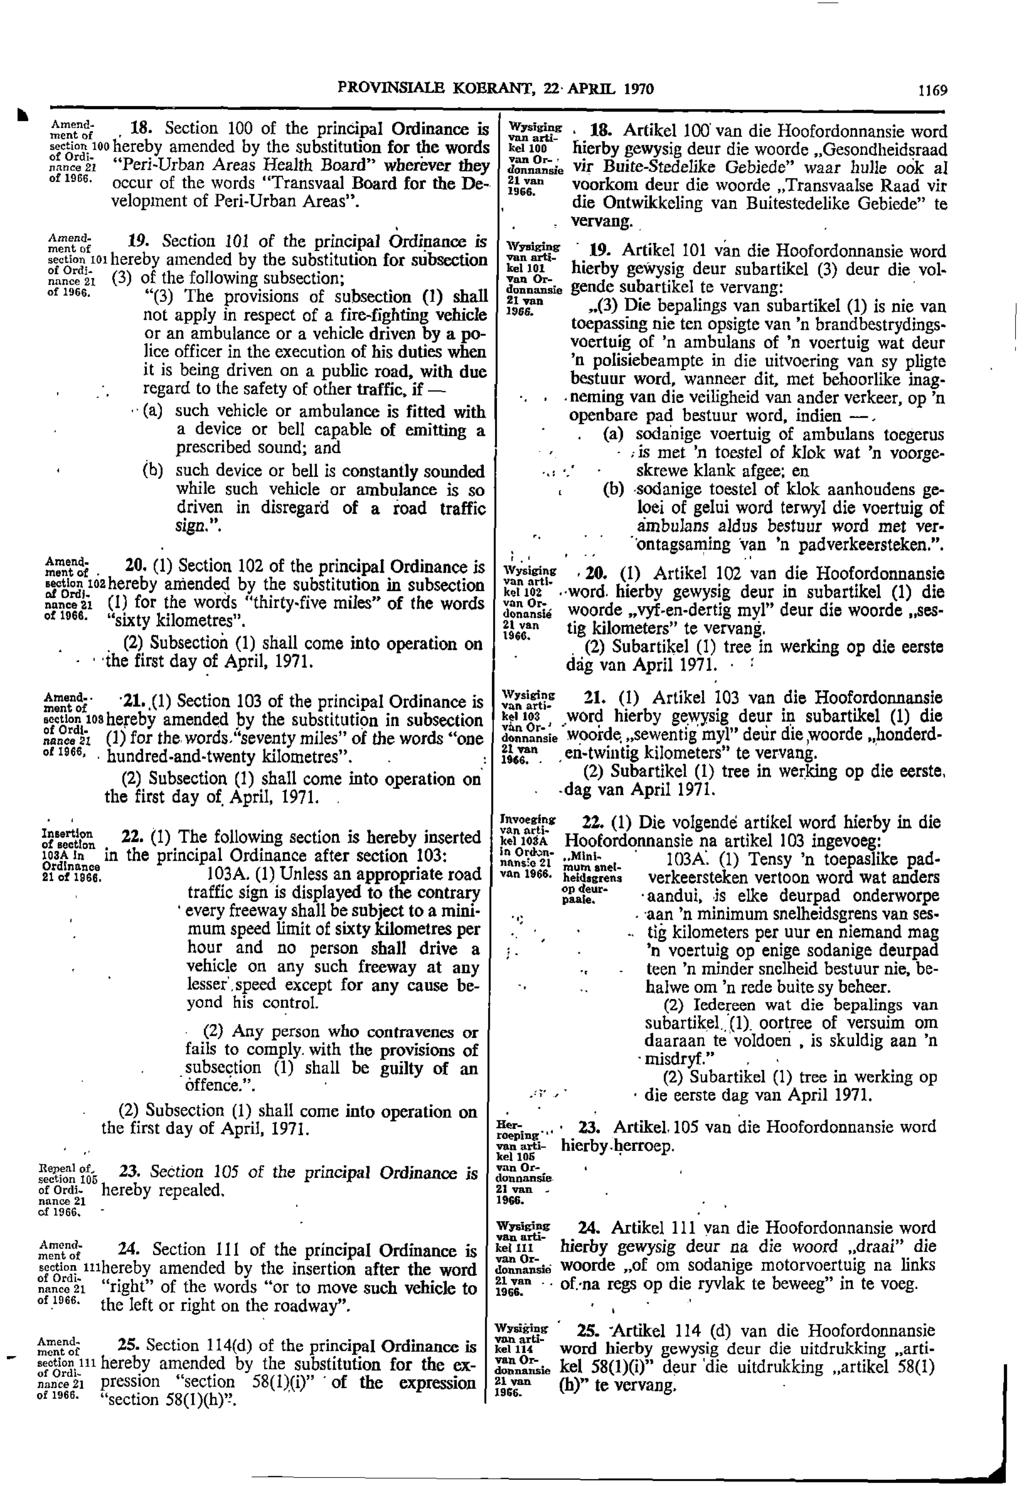 PROVINSIALE KOERANT 22 APRIL 1970 1169 Amend 18 Section 100 of the principal Ordinance is %sung ment of van artisection 100 hereby amended by the substitution for the words kel 100 18 Artikel 100 van